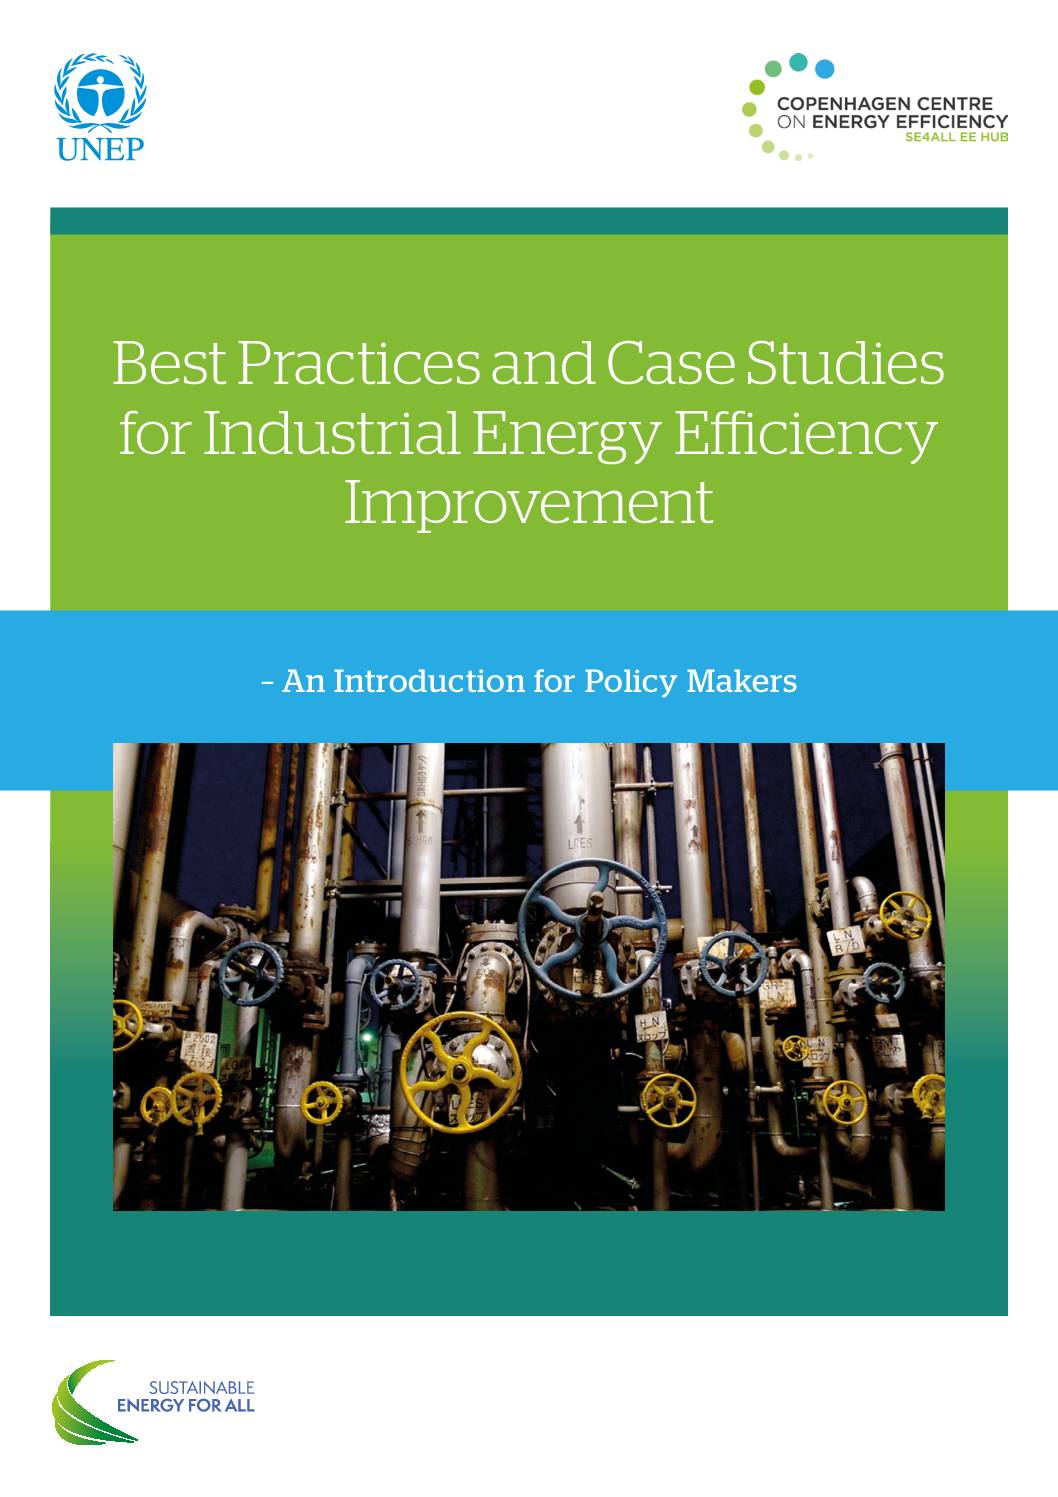 Best Practices and Case Studies for Industrial Energy Efficiency Improvement